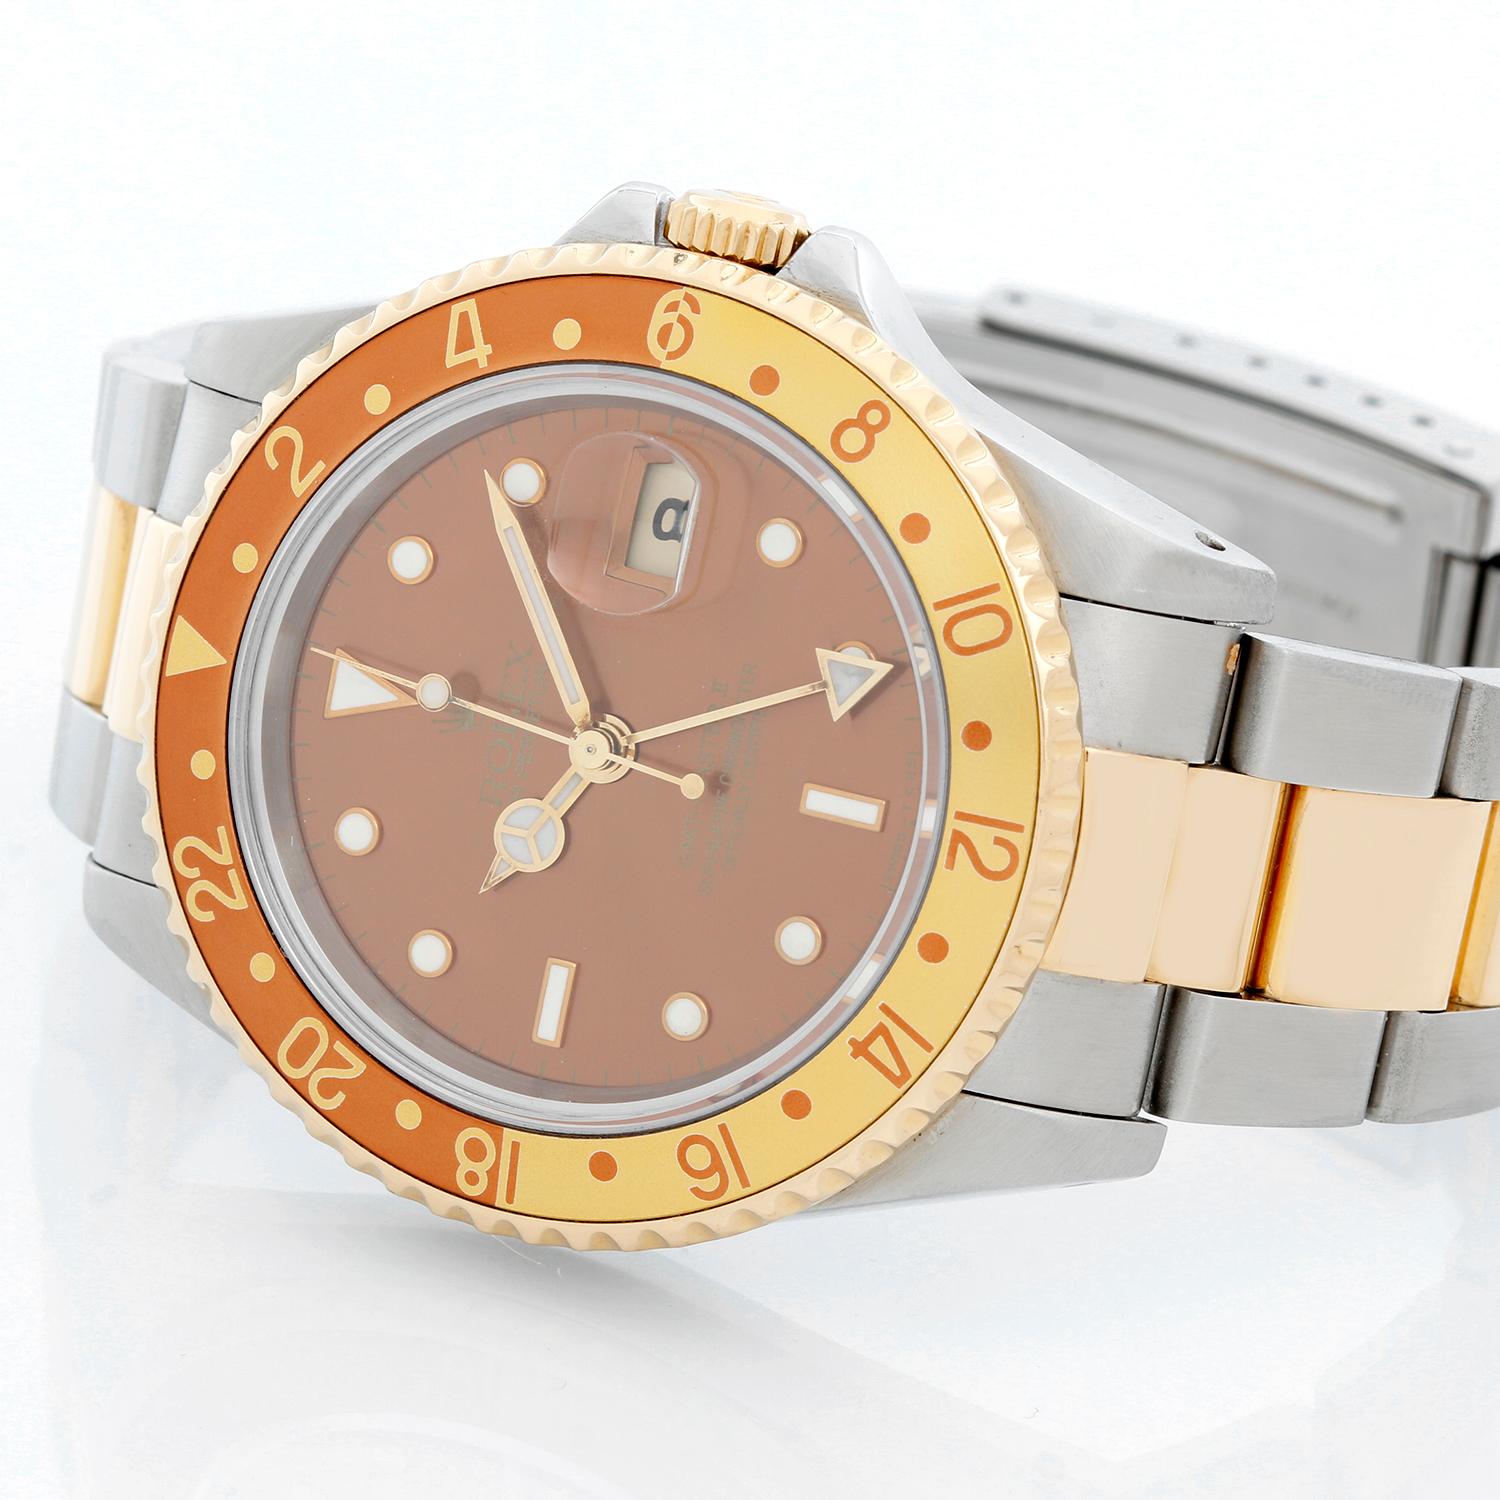 Men's Rolex GMT-Master II Watch 16713 - Automatic winding, 31 jewels, Quickset, sapphire crystal. Stainless steel with 18k yellow gold bezel with brown and gold insert. Brown dial with luminous style markers. Stainless steel & 18k yellow gold Oyster